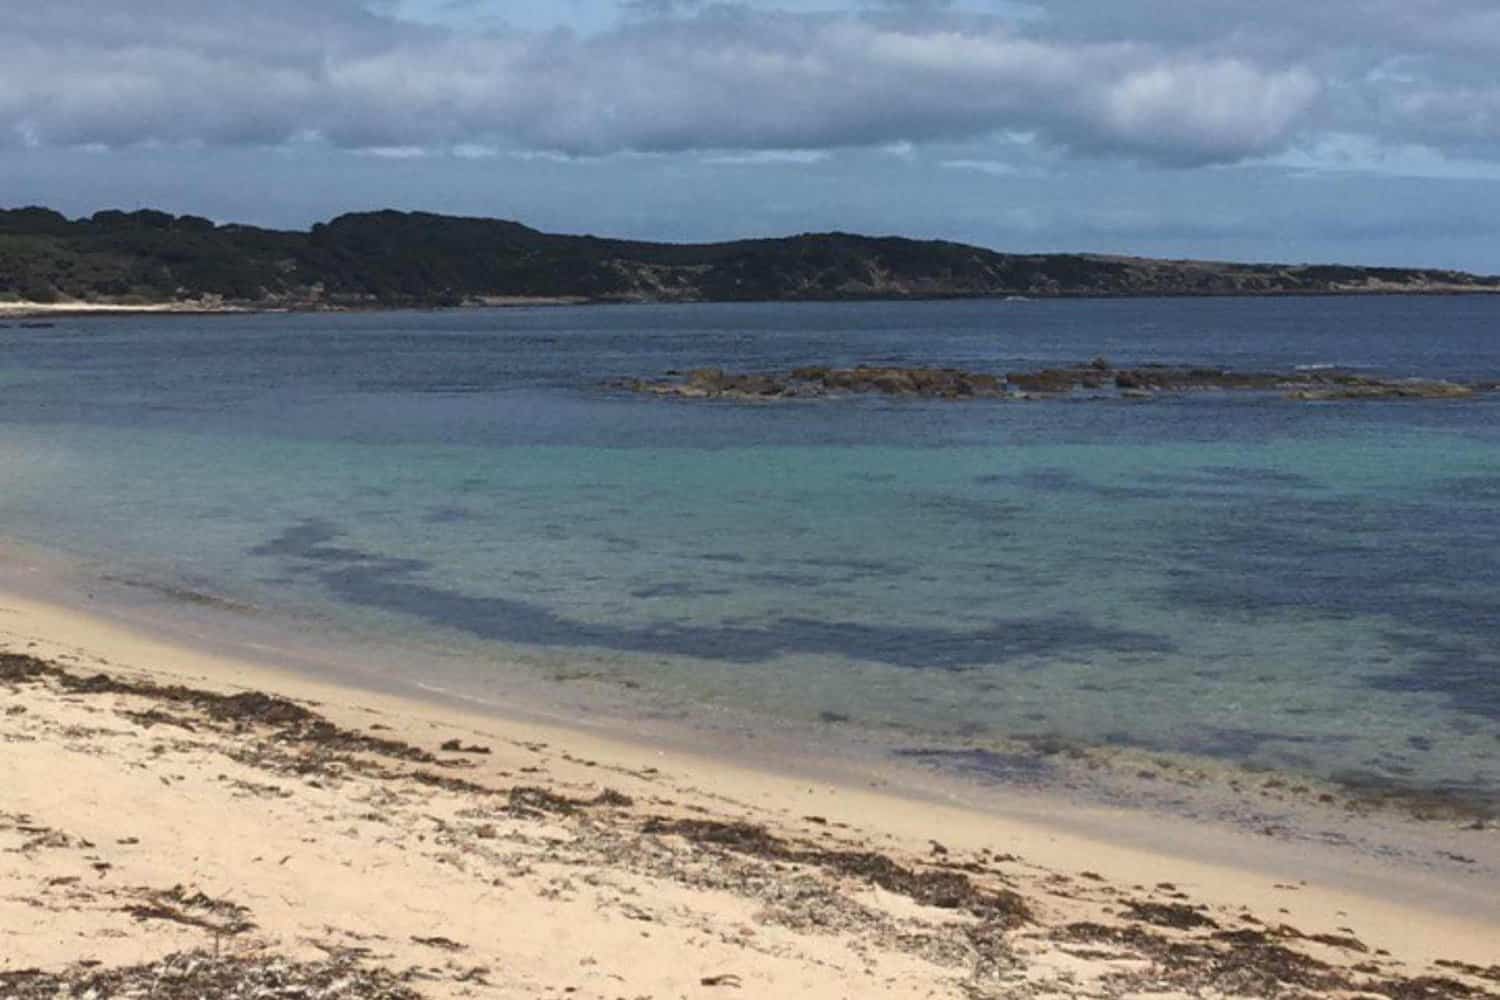 A peaceful stretch of Gracetown beach reveals clear, shallow waters transitioning into deeper blue, with seaweed-strewn sand leading to a distant headland, all under a gentle sky with drifting clouds.